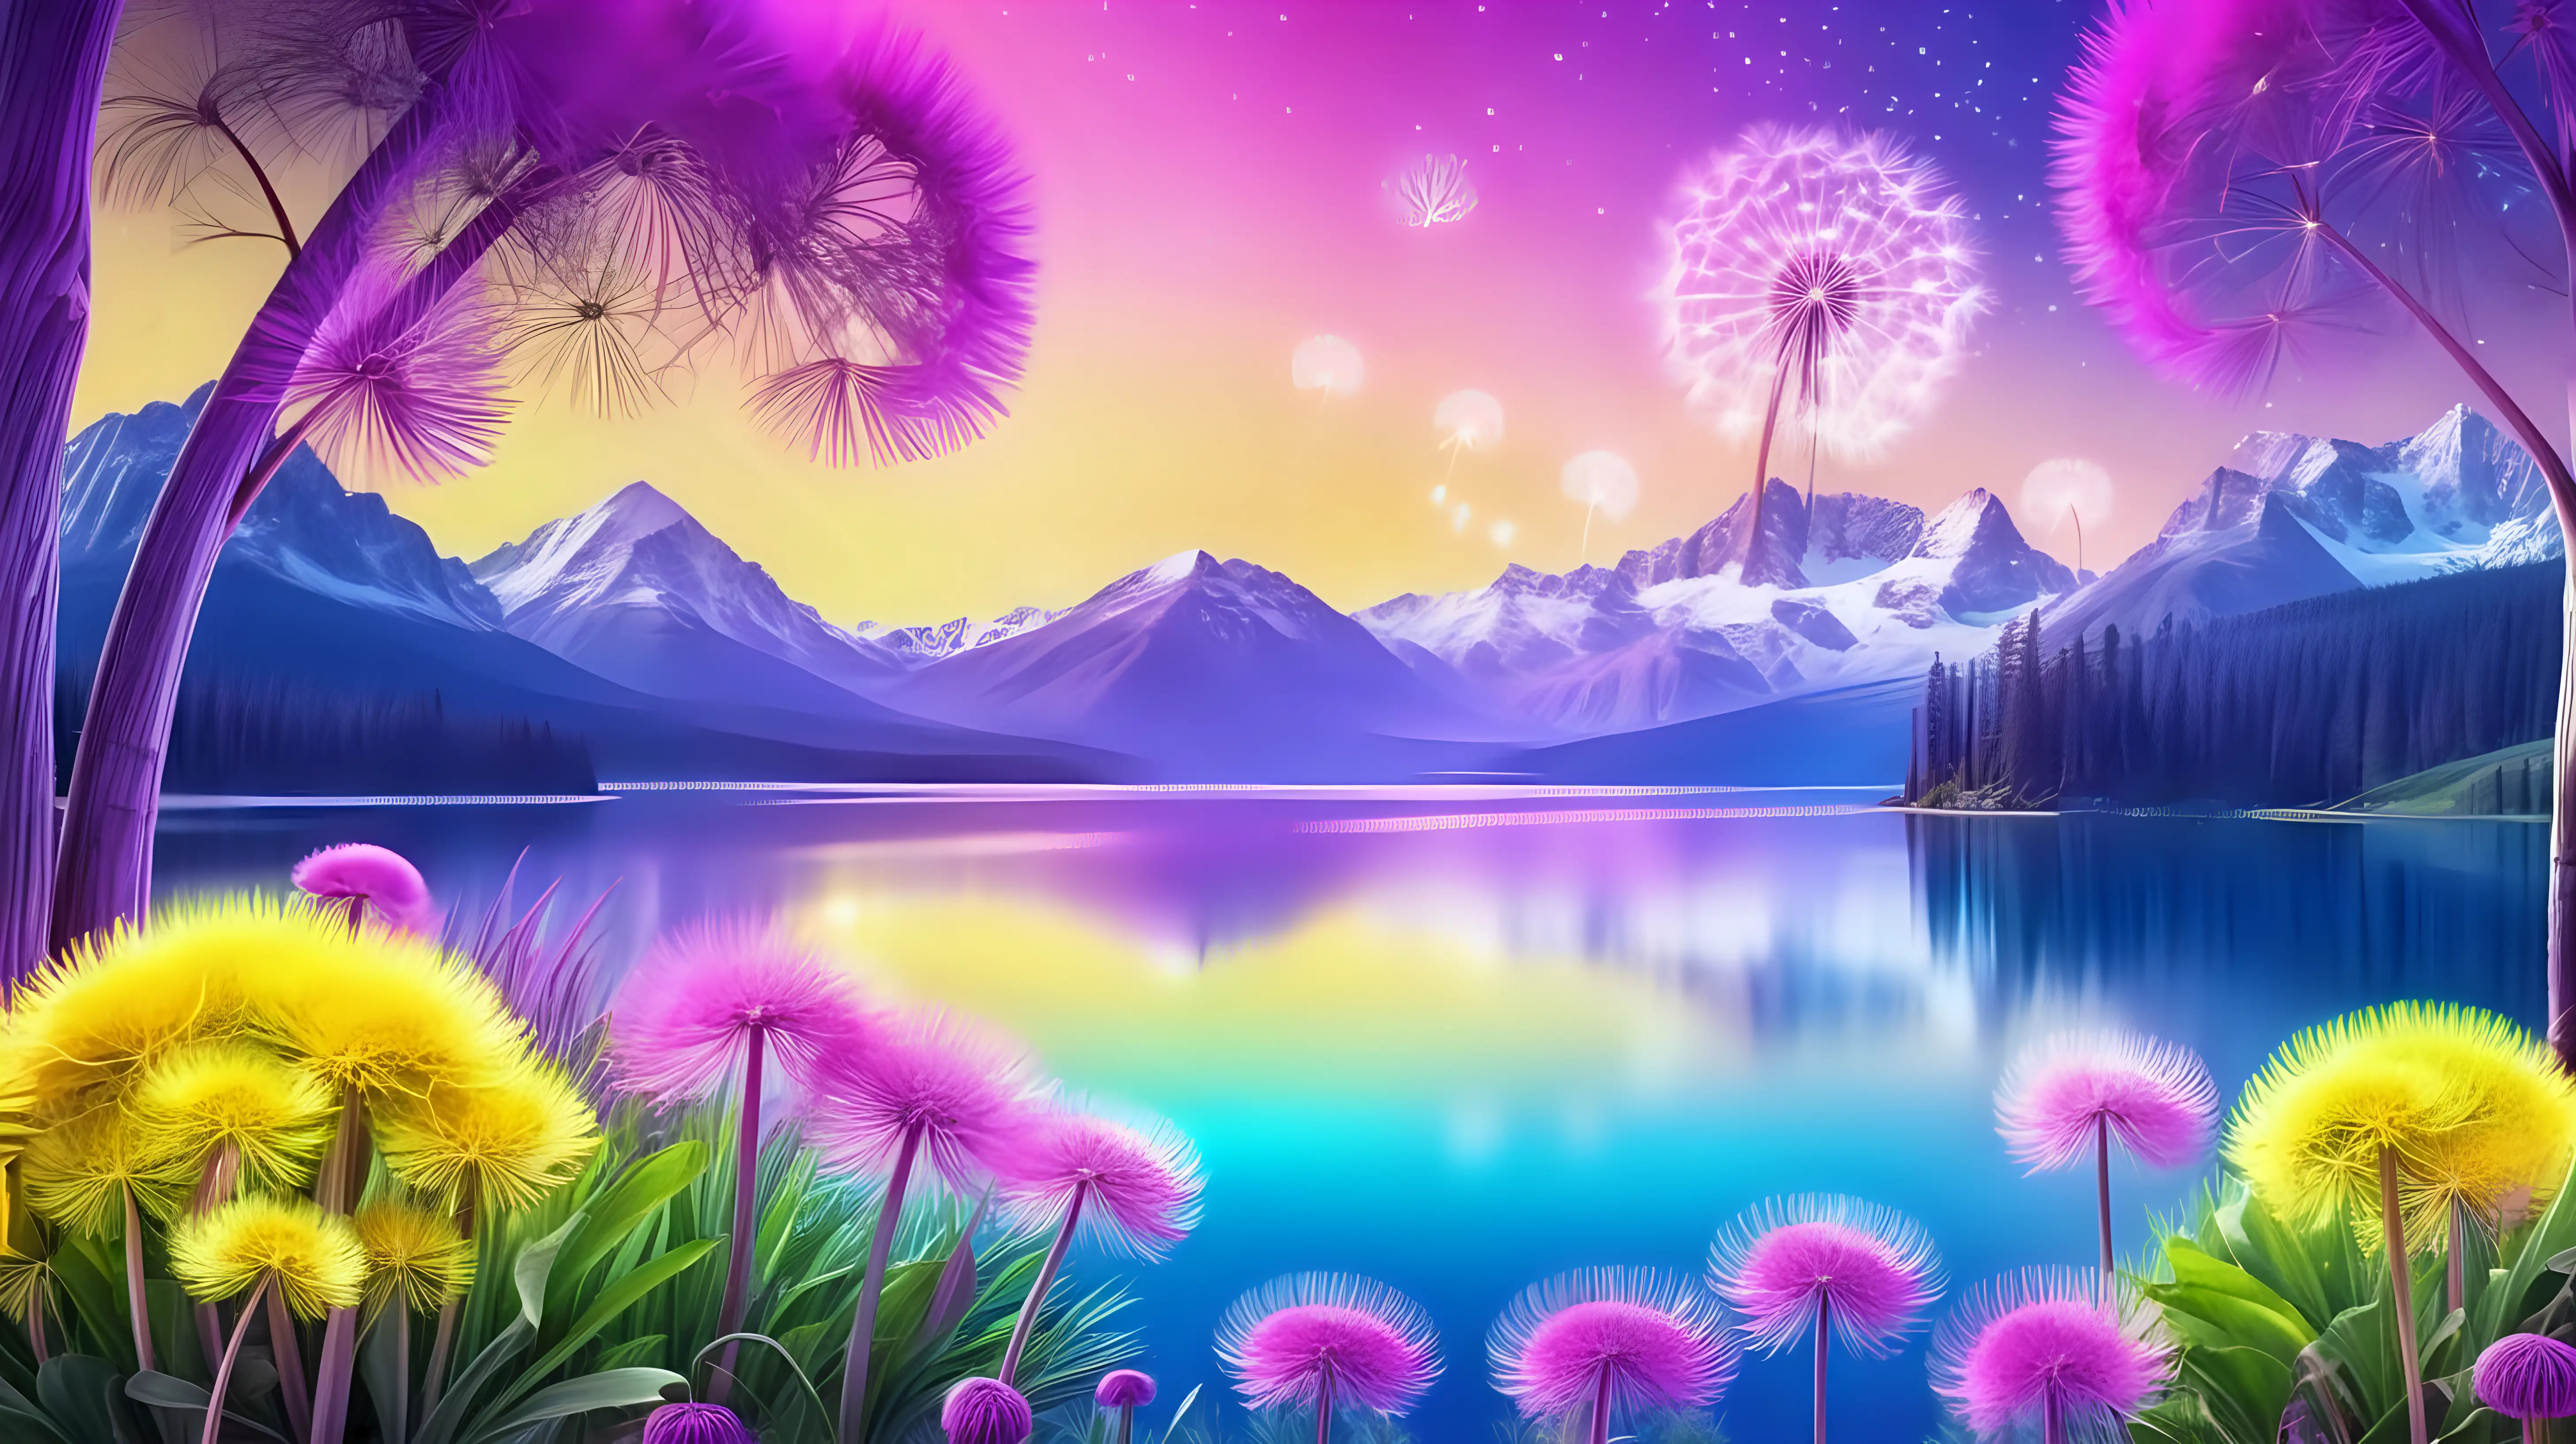 Bright palm leaves and Magical fairytale. Glowing dandelions with pink and Green and Blue. Purple. Bright-yellow. Magical Fairytale trees. bright lake and mountains. bright-yellow dandelions.